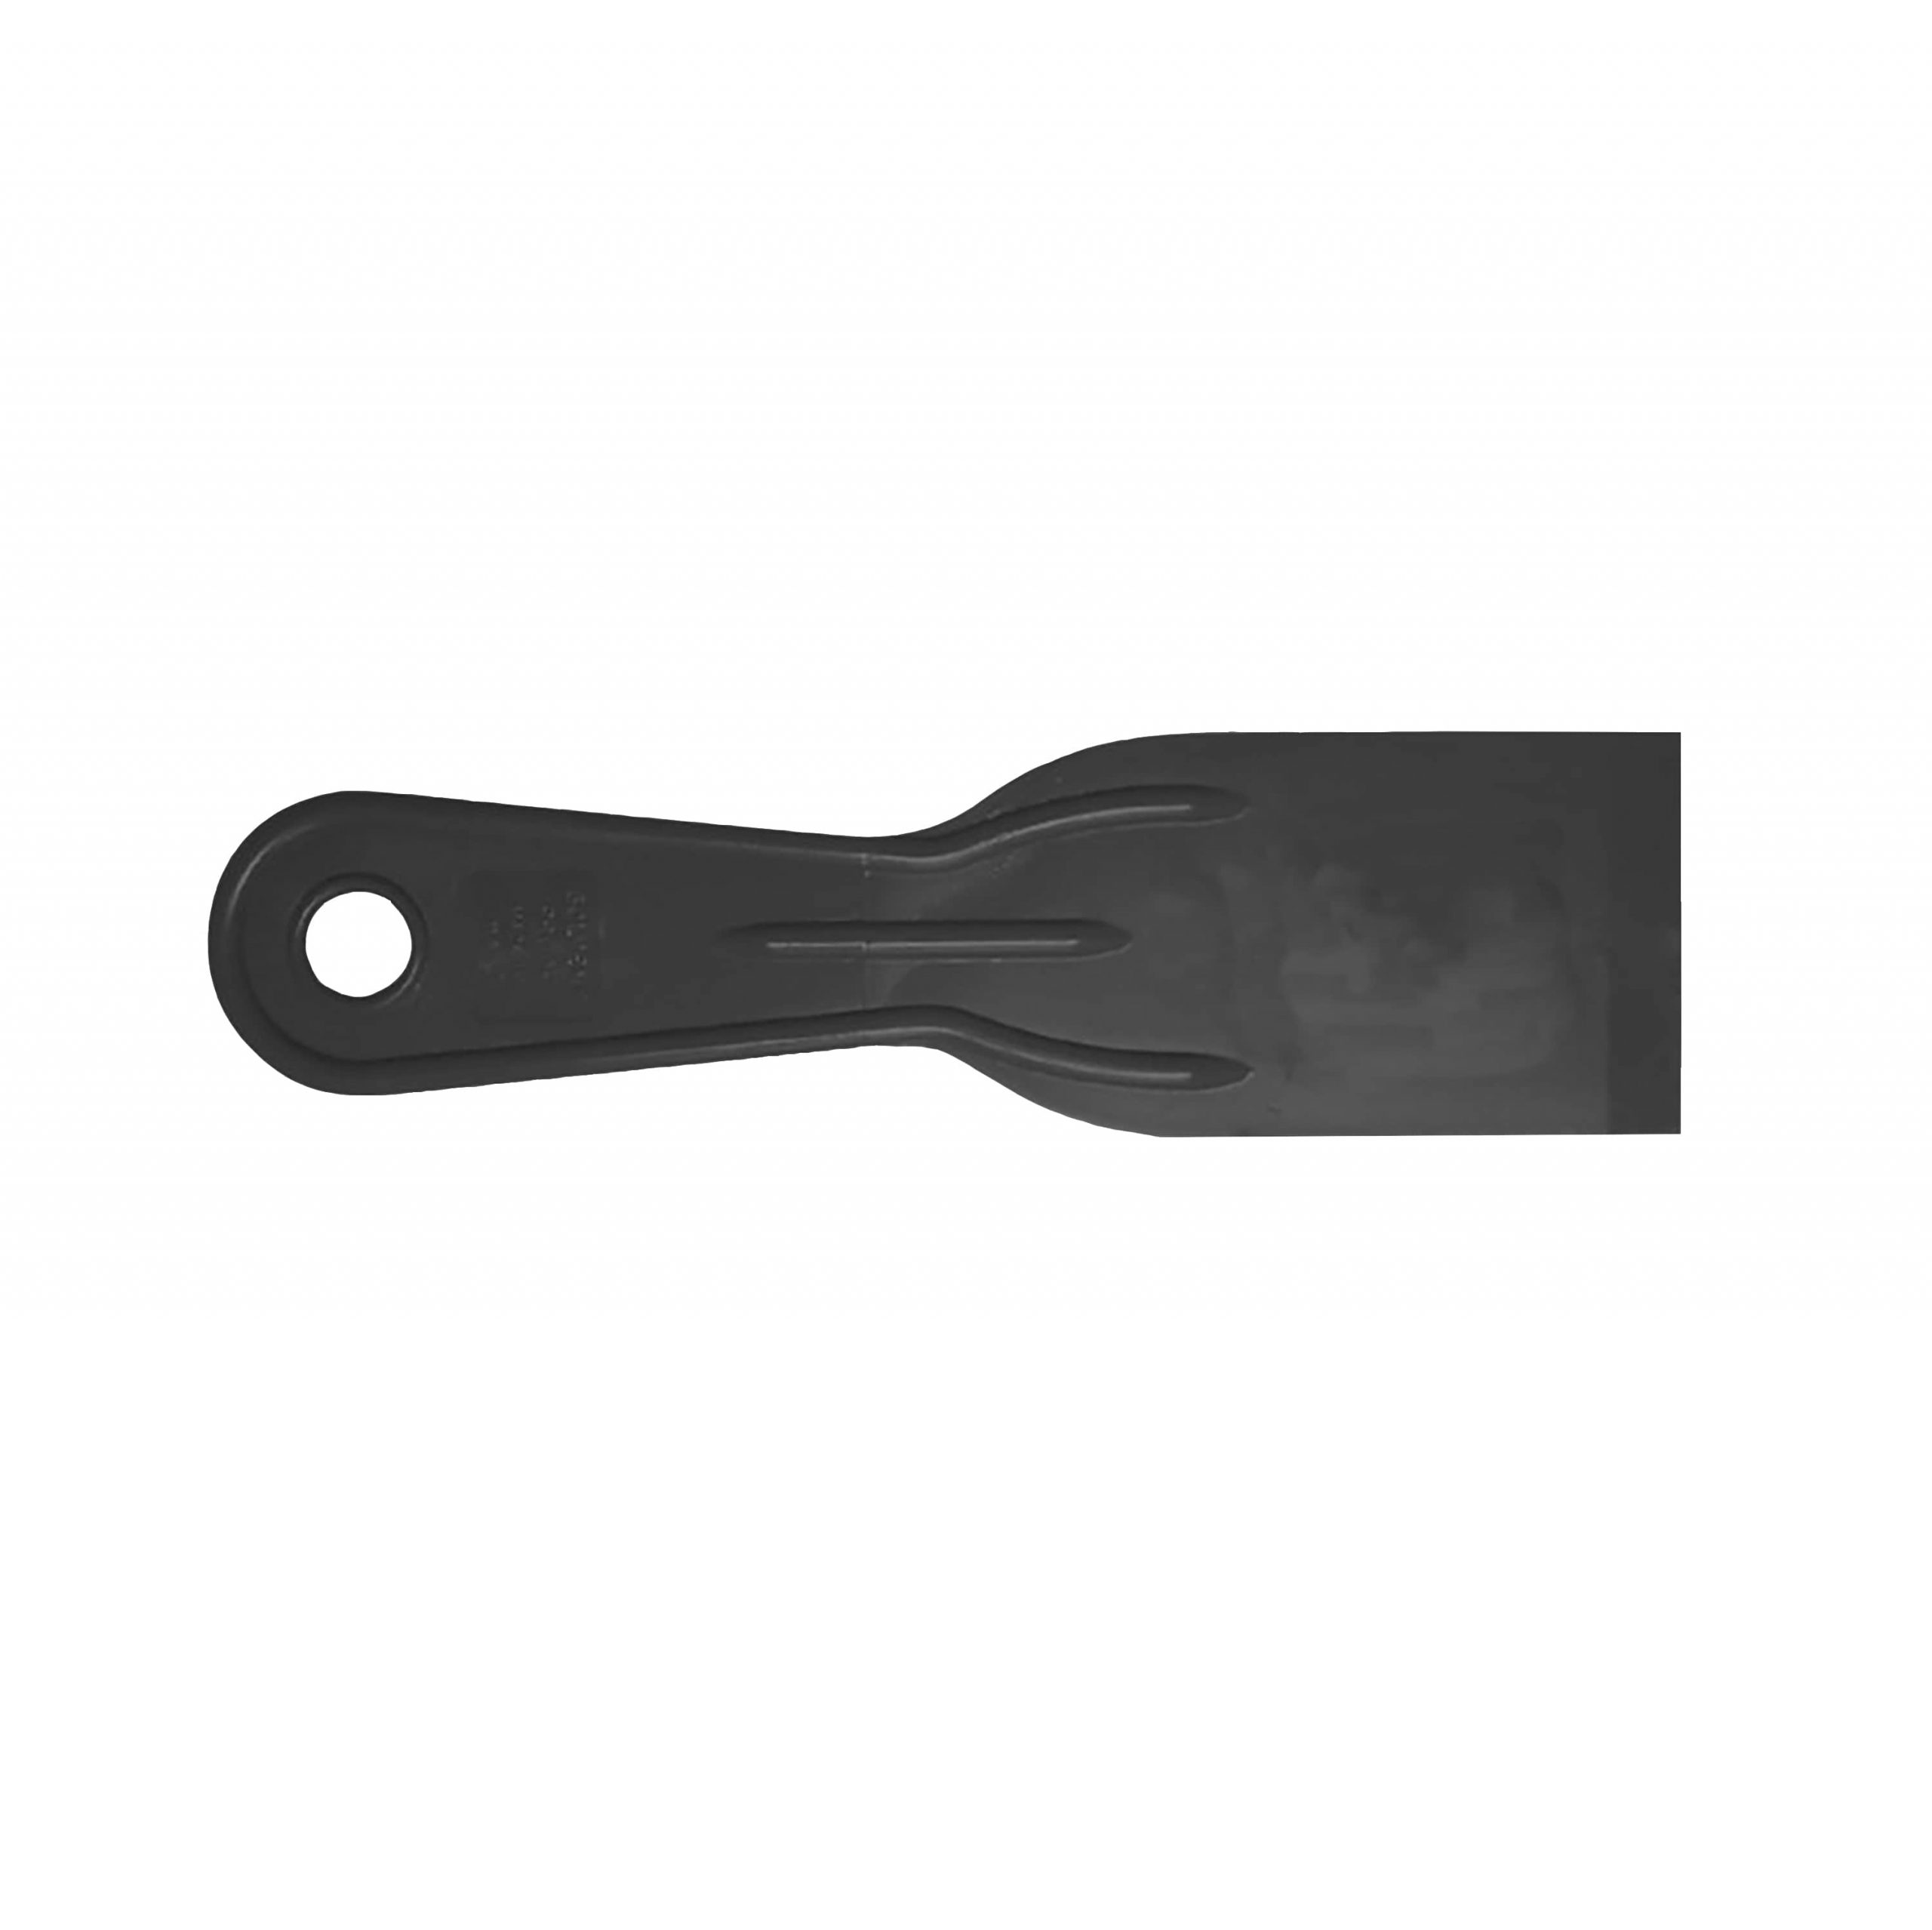 DS20P) 2 Polypropylene Plastic Putty Knife, Labelled » ALLWAY® The Tools  You Ask For By Name